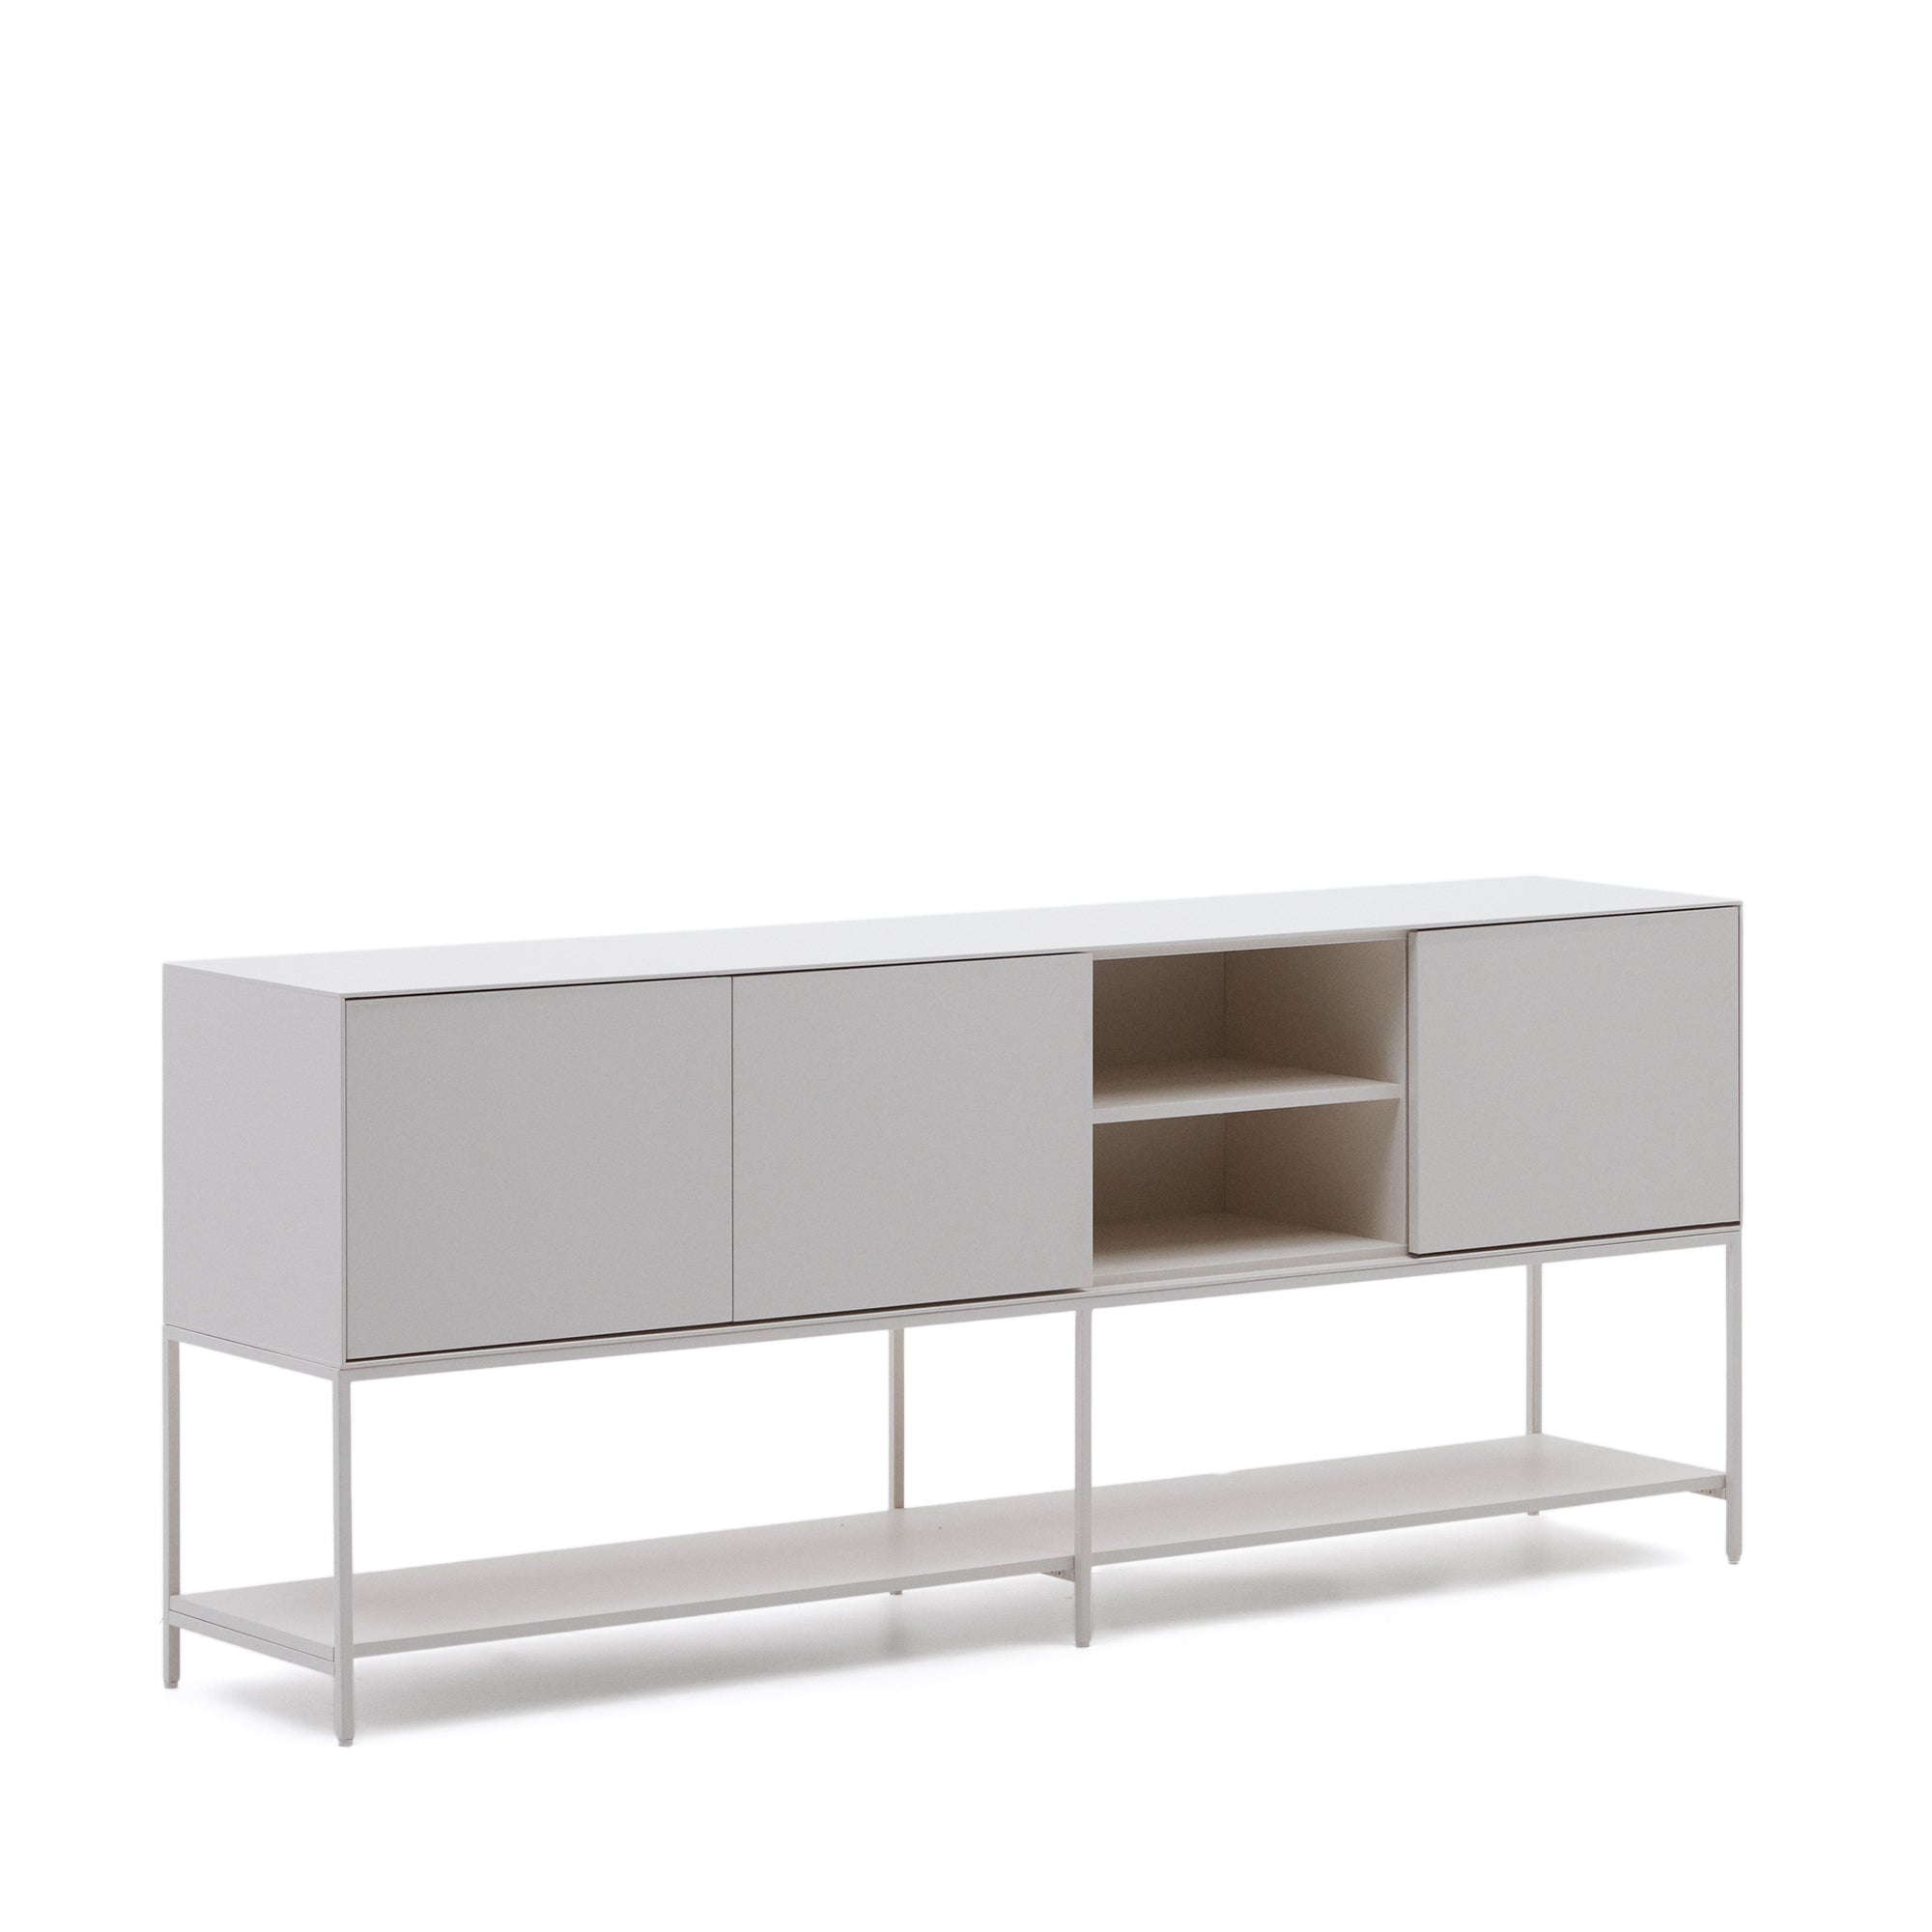 Vedrana 3-door sideboard white lacquered MDF 195 x 80 cm